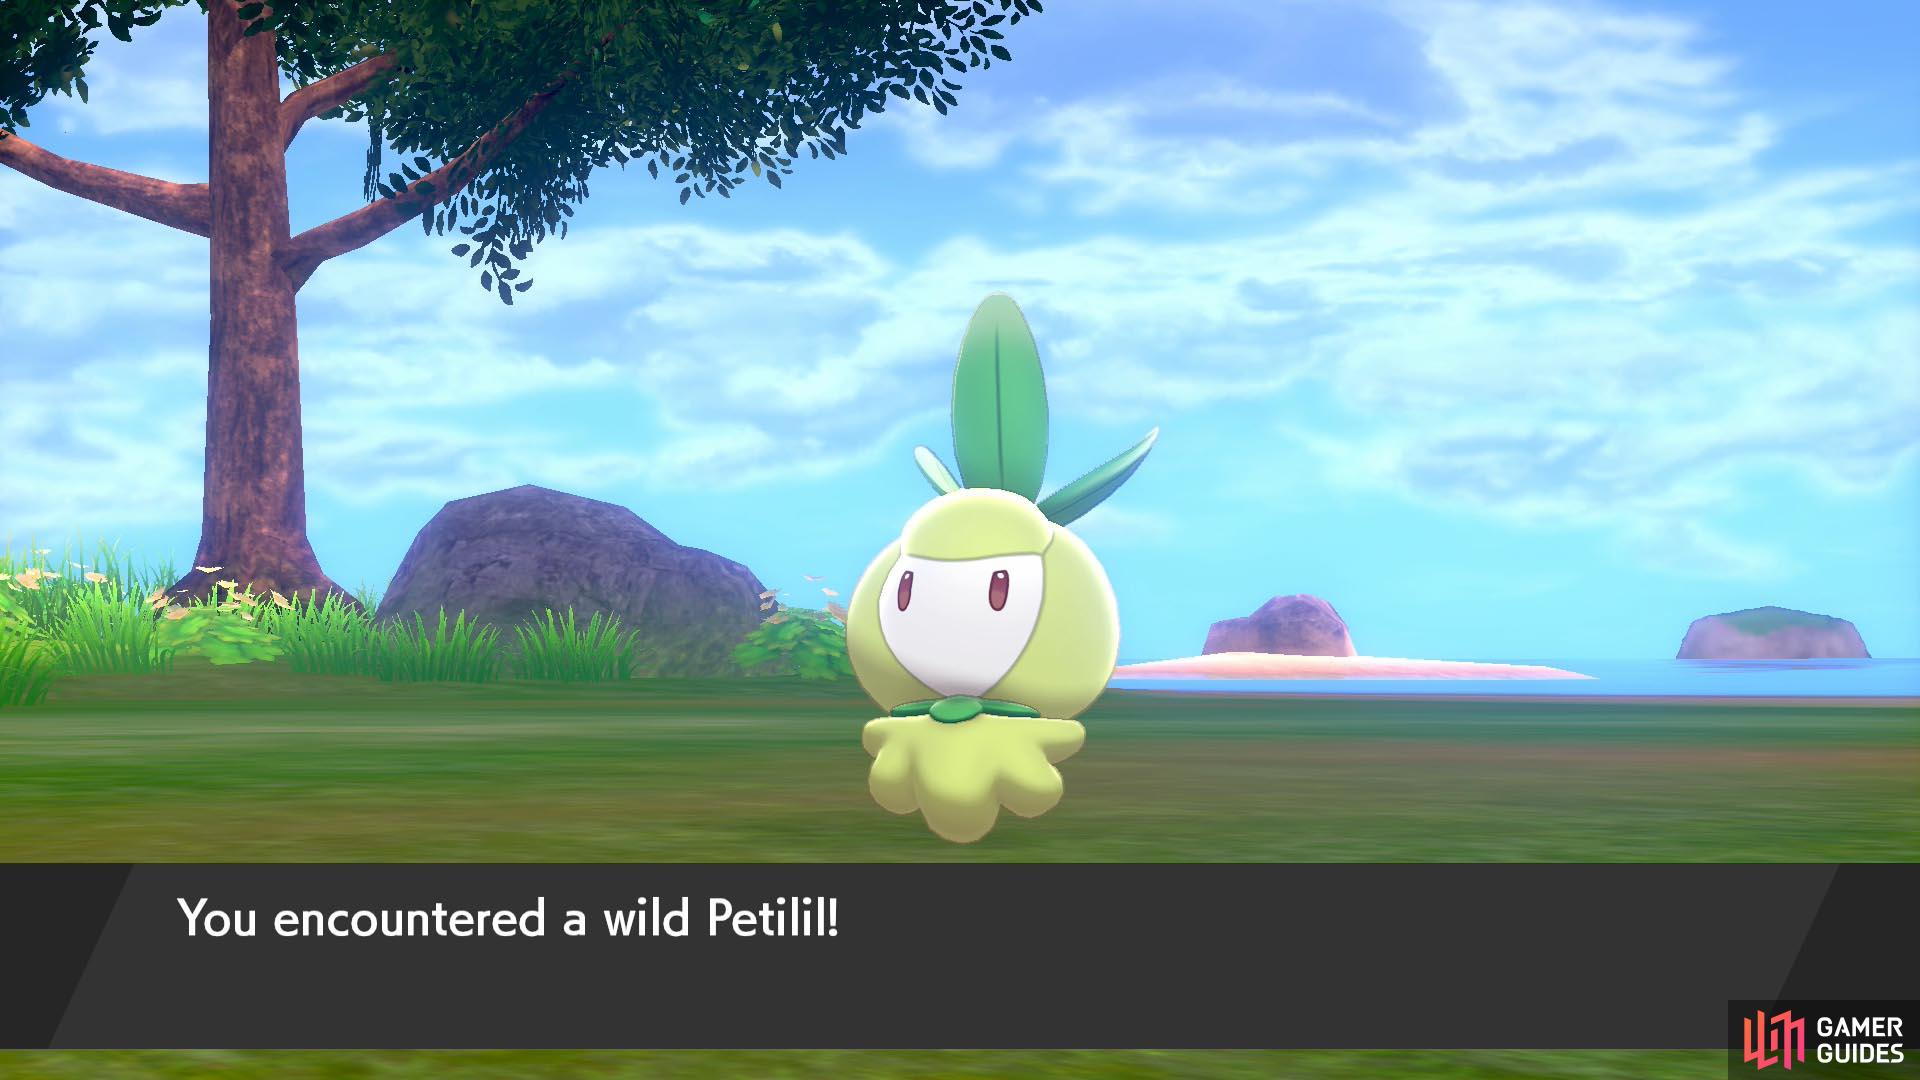 There’s not much lurking inside the tall grass, but at least Petilil is an adorable sight.